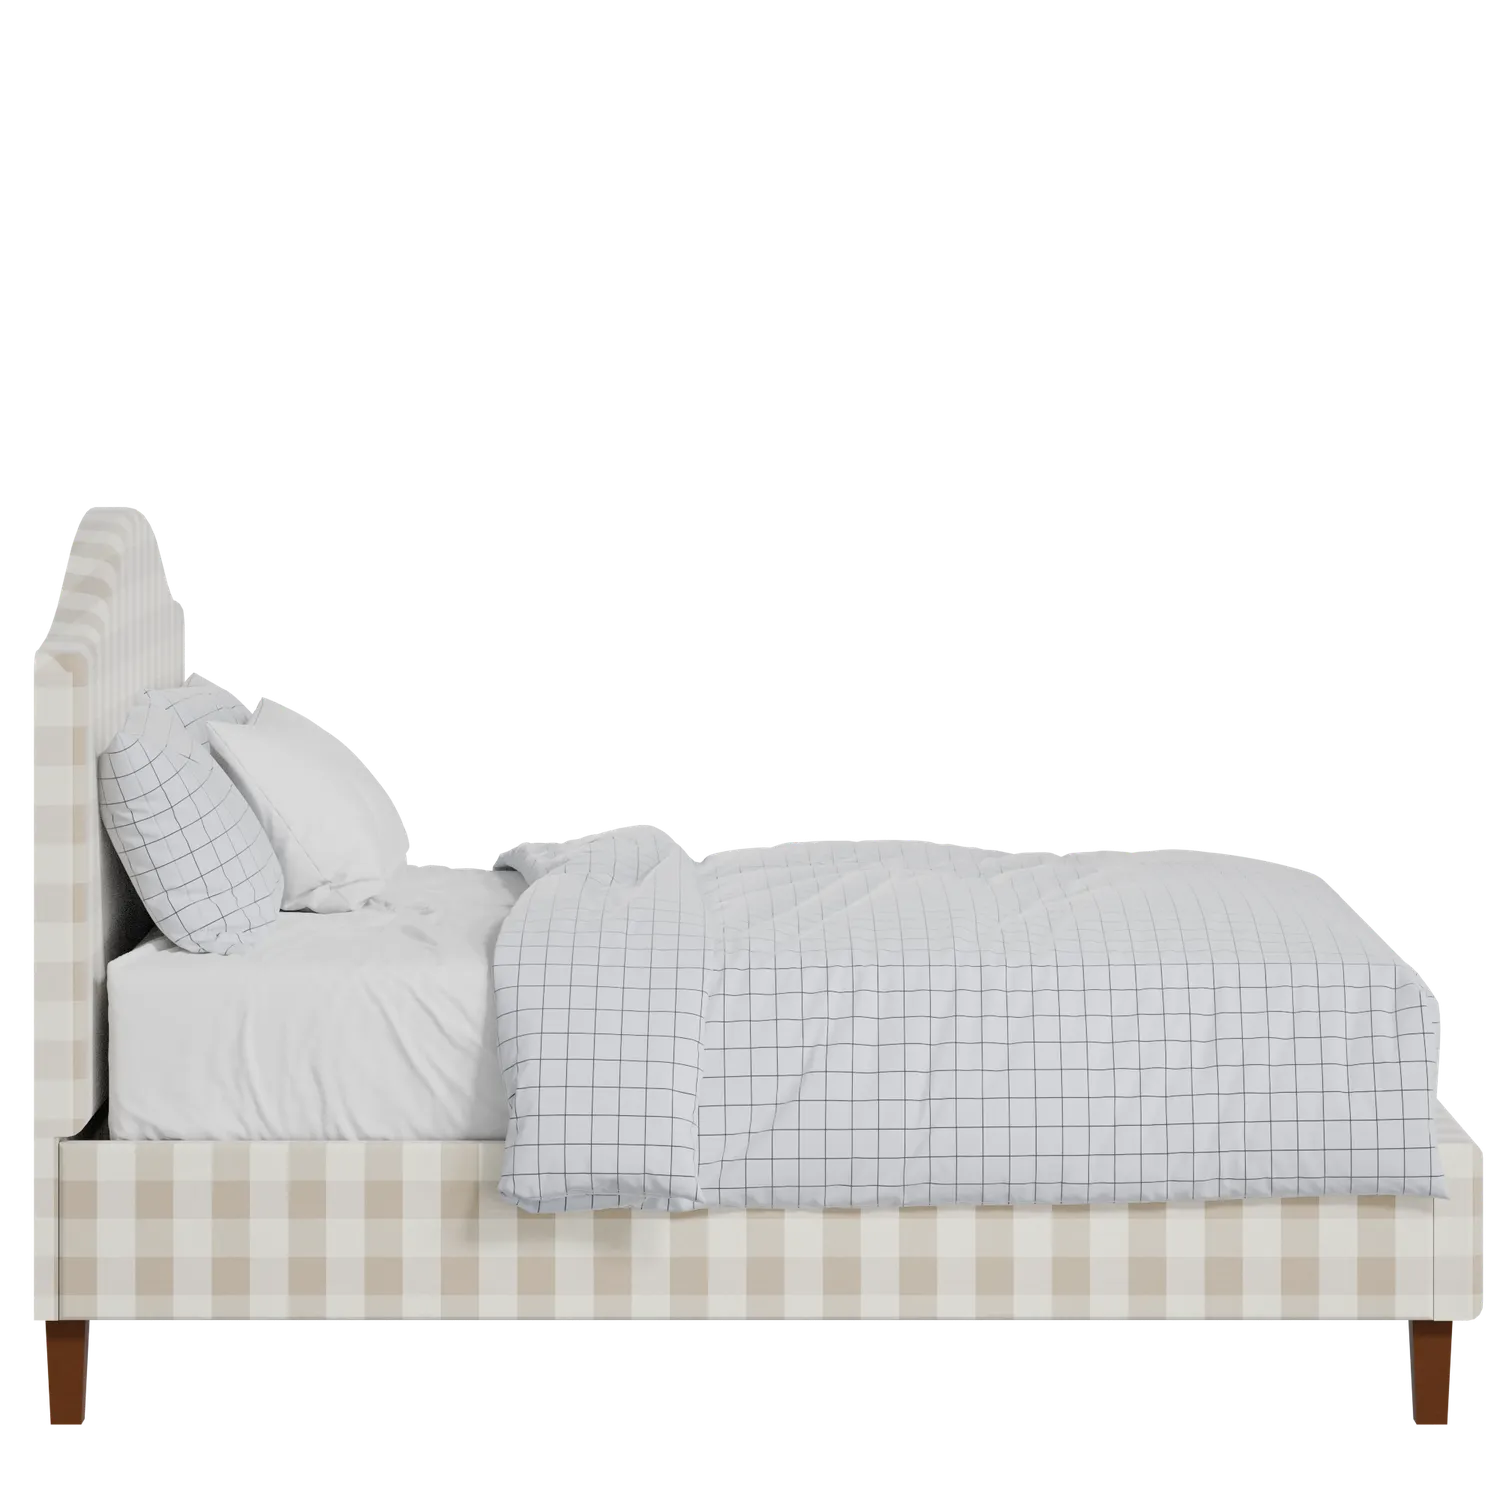 Burley Slim upholstered bed in Romo Kemble Putty fabric with Juno mattress